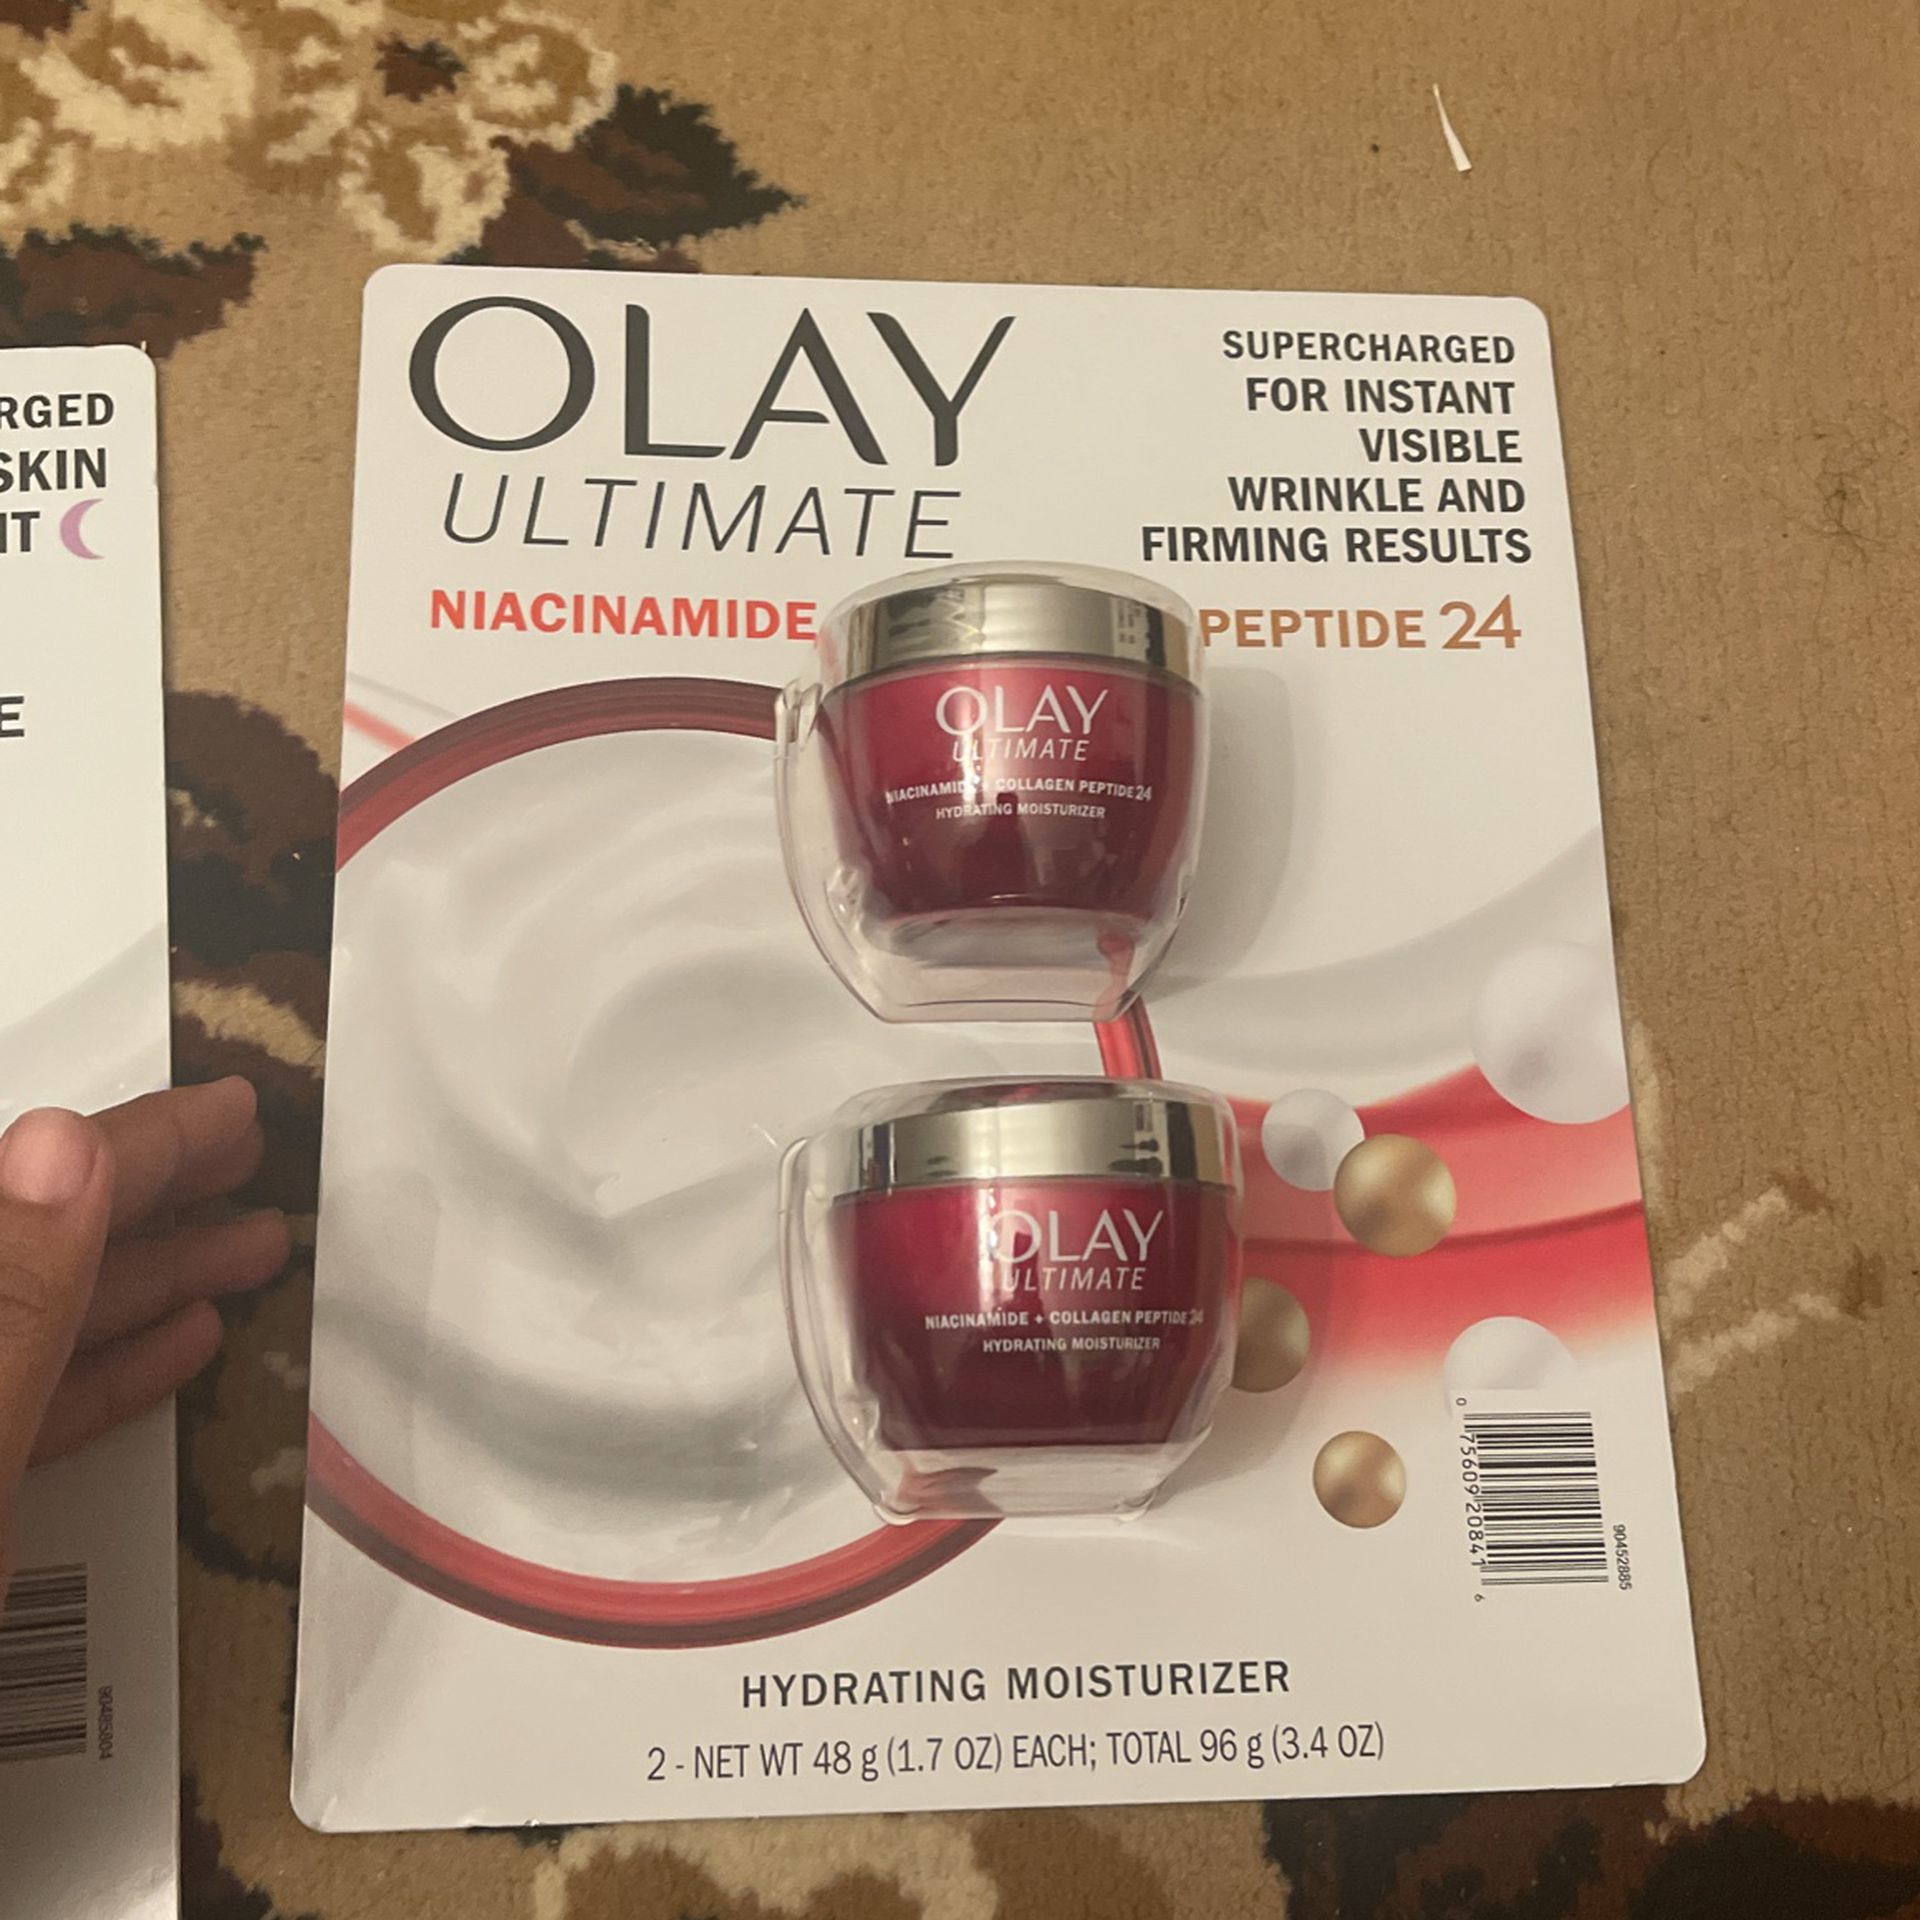 Olay Ultimate Niacinamide + Collagen Peptide 24 